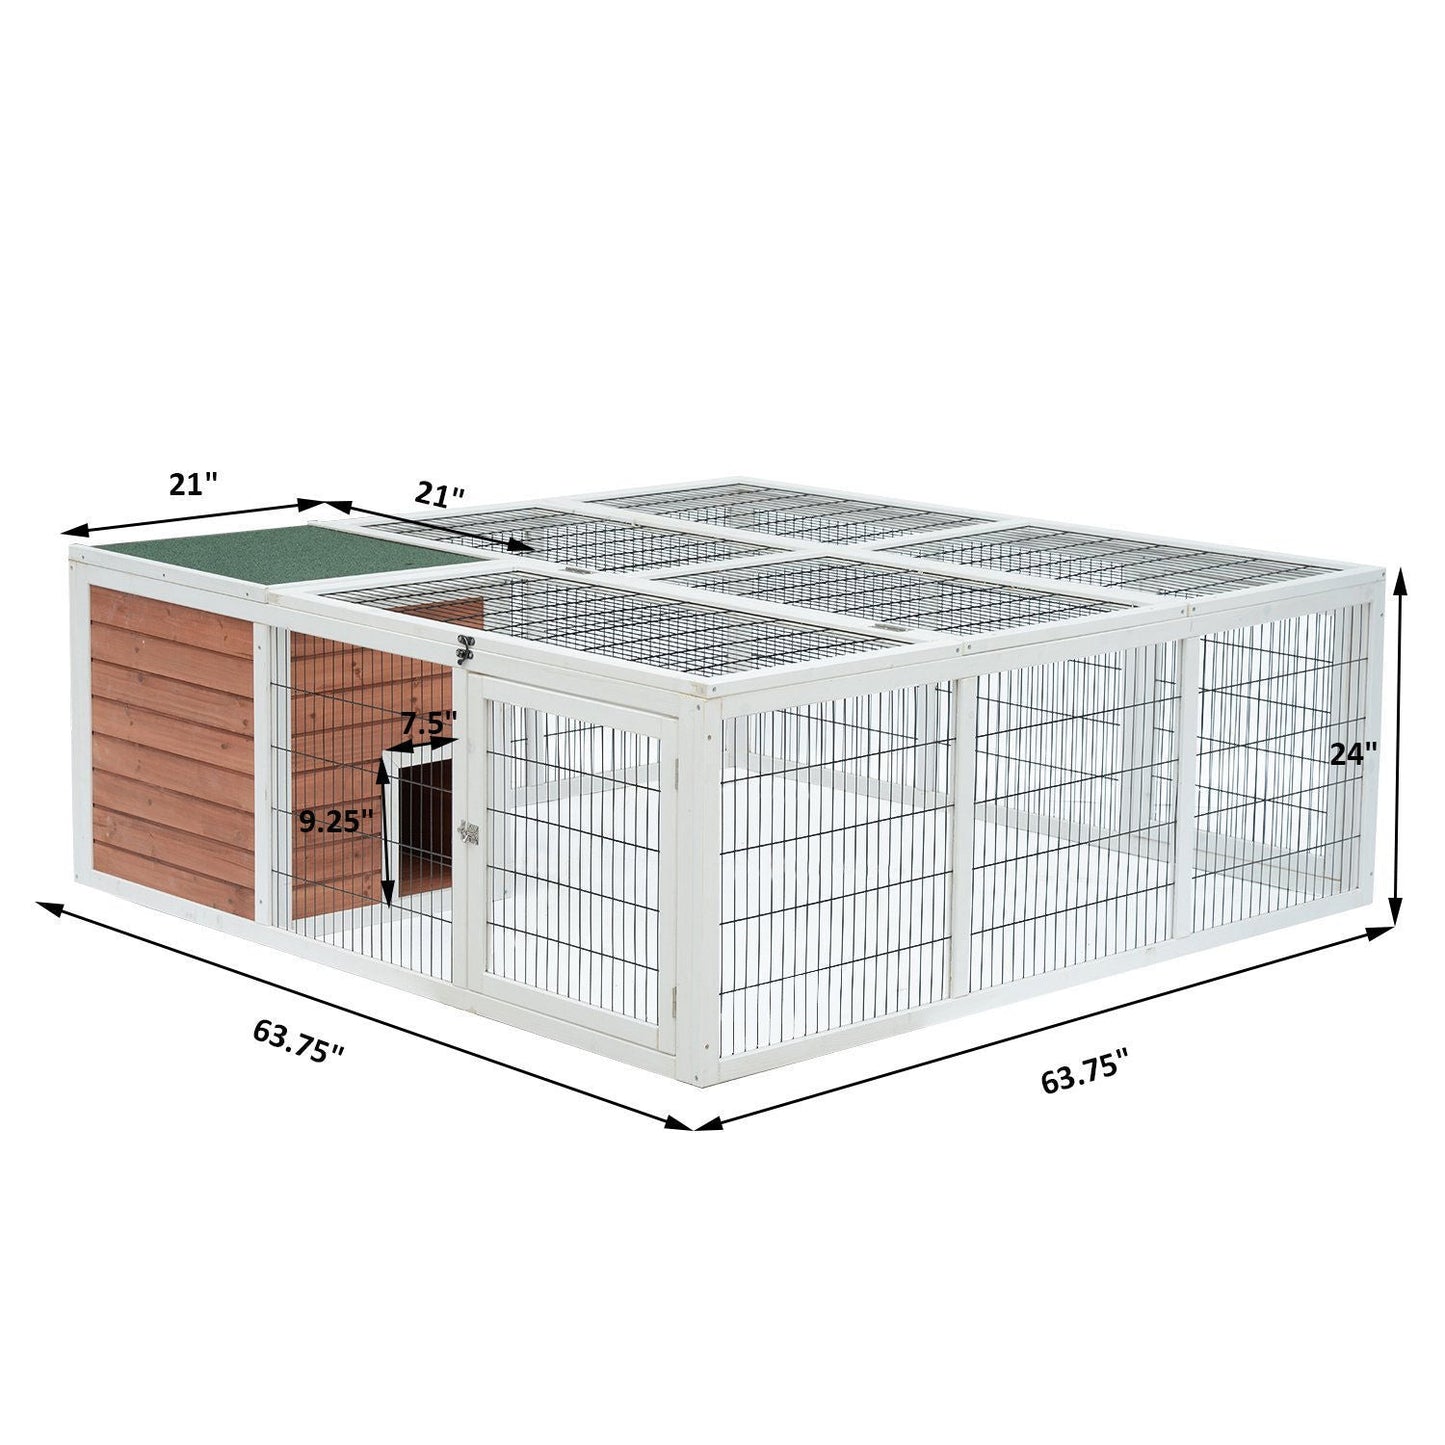 -Wooden Outdoor Rabbit Hutch Small Animal Cages Brown and White 64" Fir Wood with Run and Mesh Cover Pawhut - Outdoor Style Company